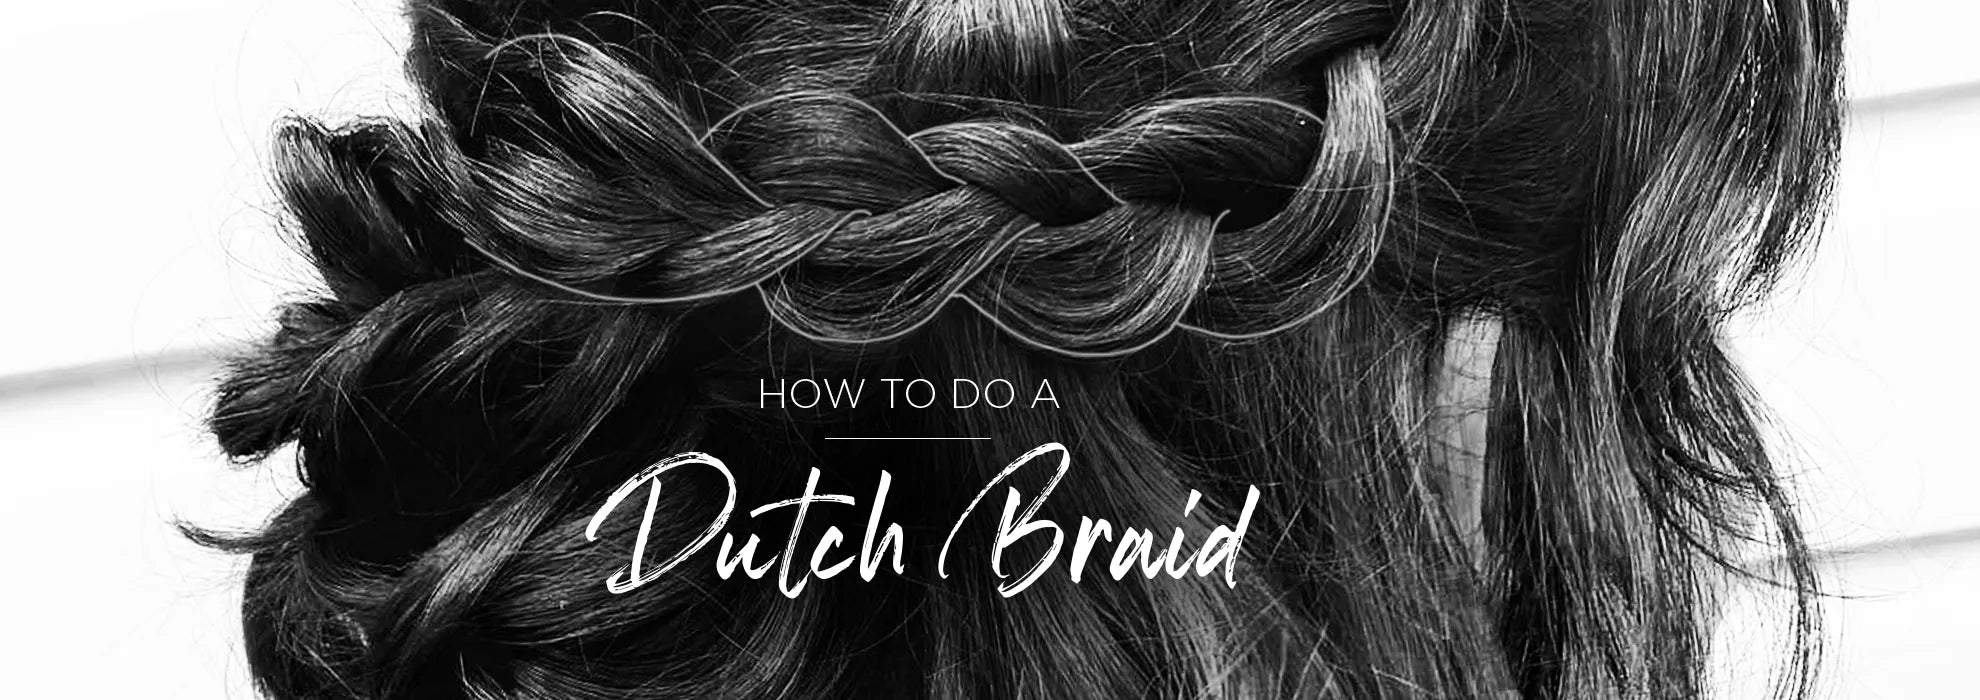 How To Dutch Braid Step by Step For Beginners - Full Talk Through - Dutch  Braids For Beginners 